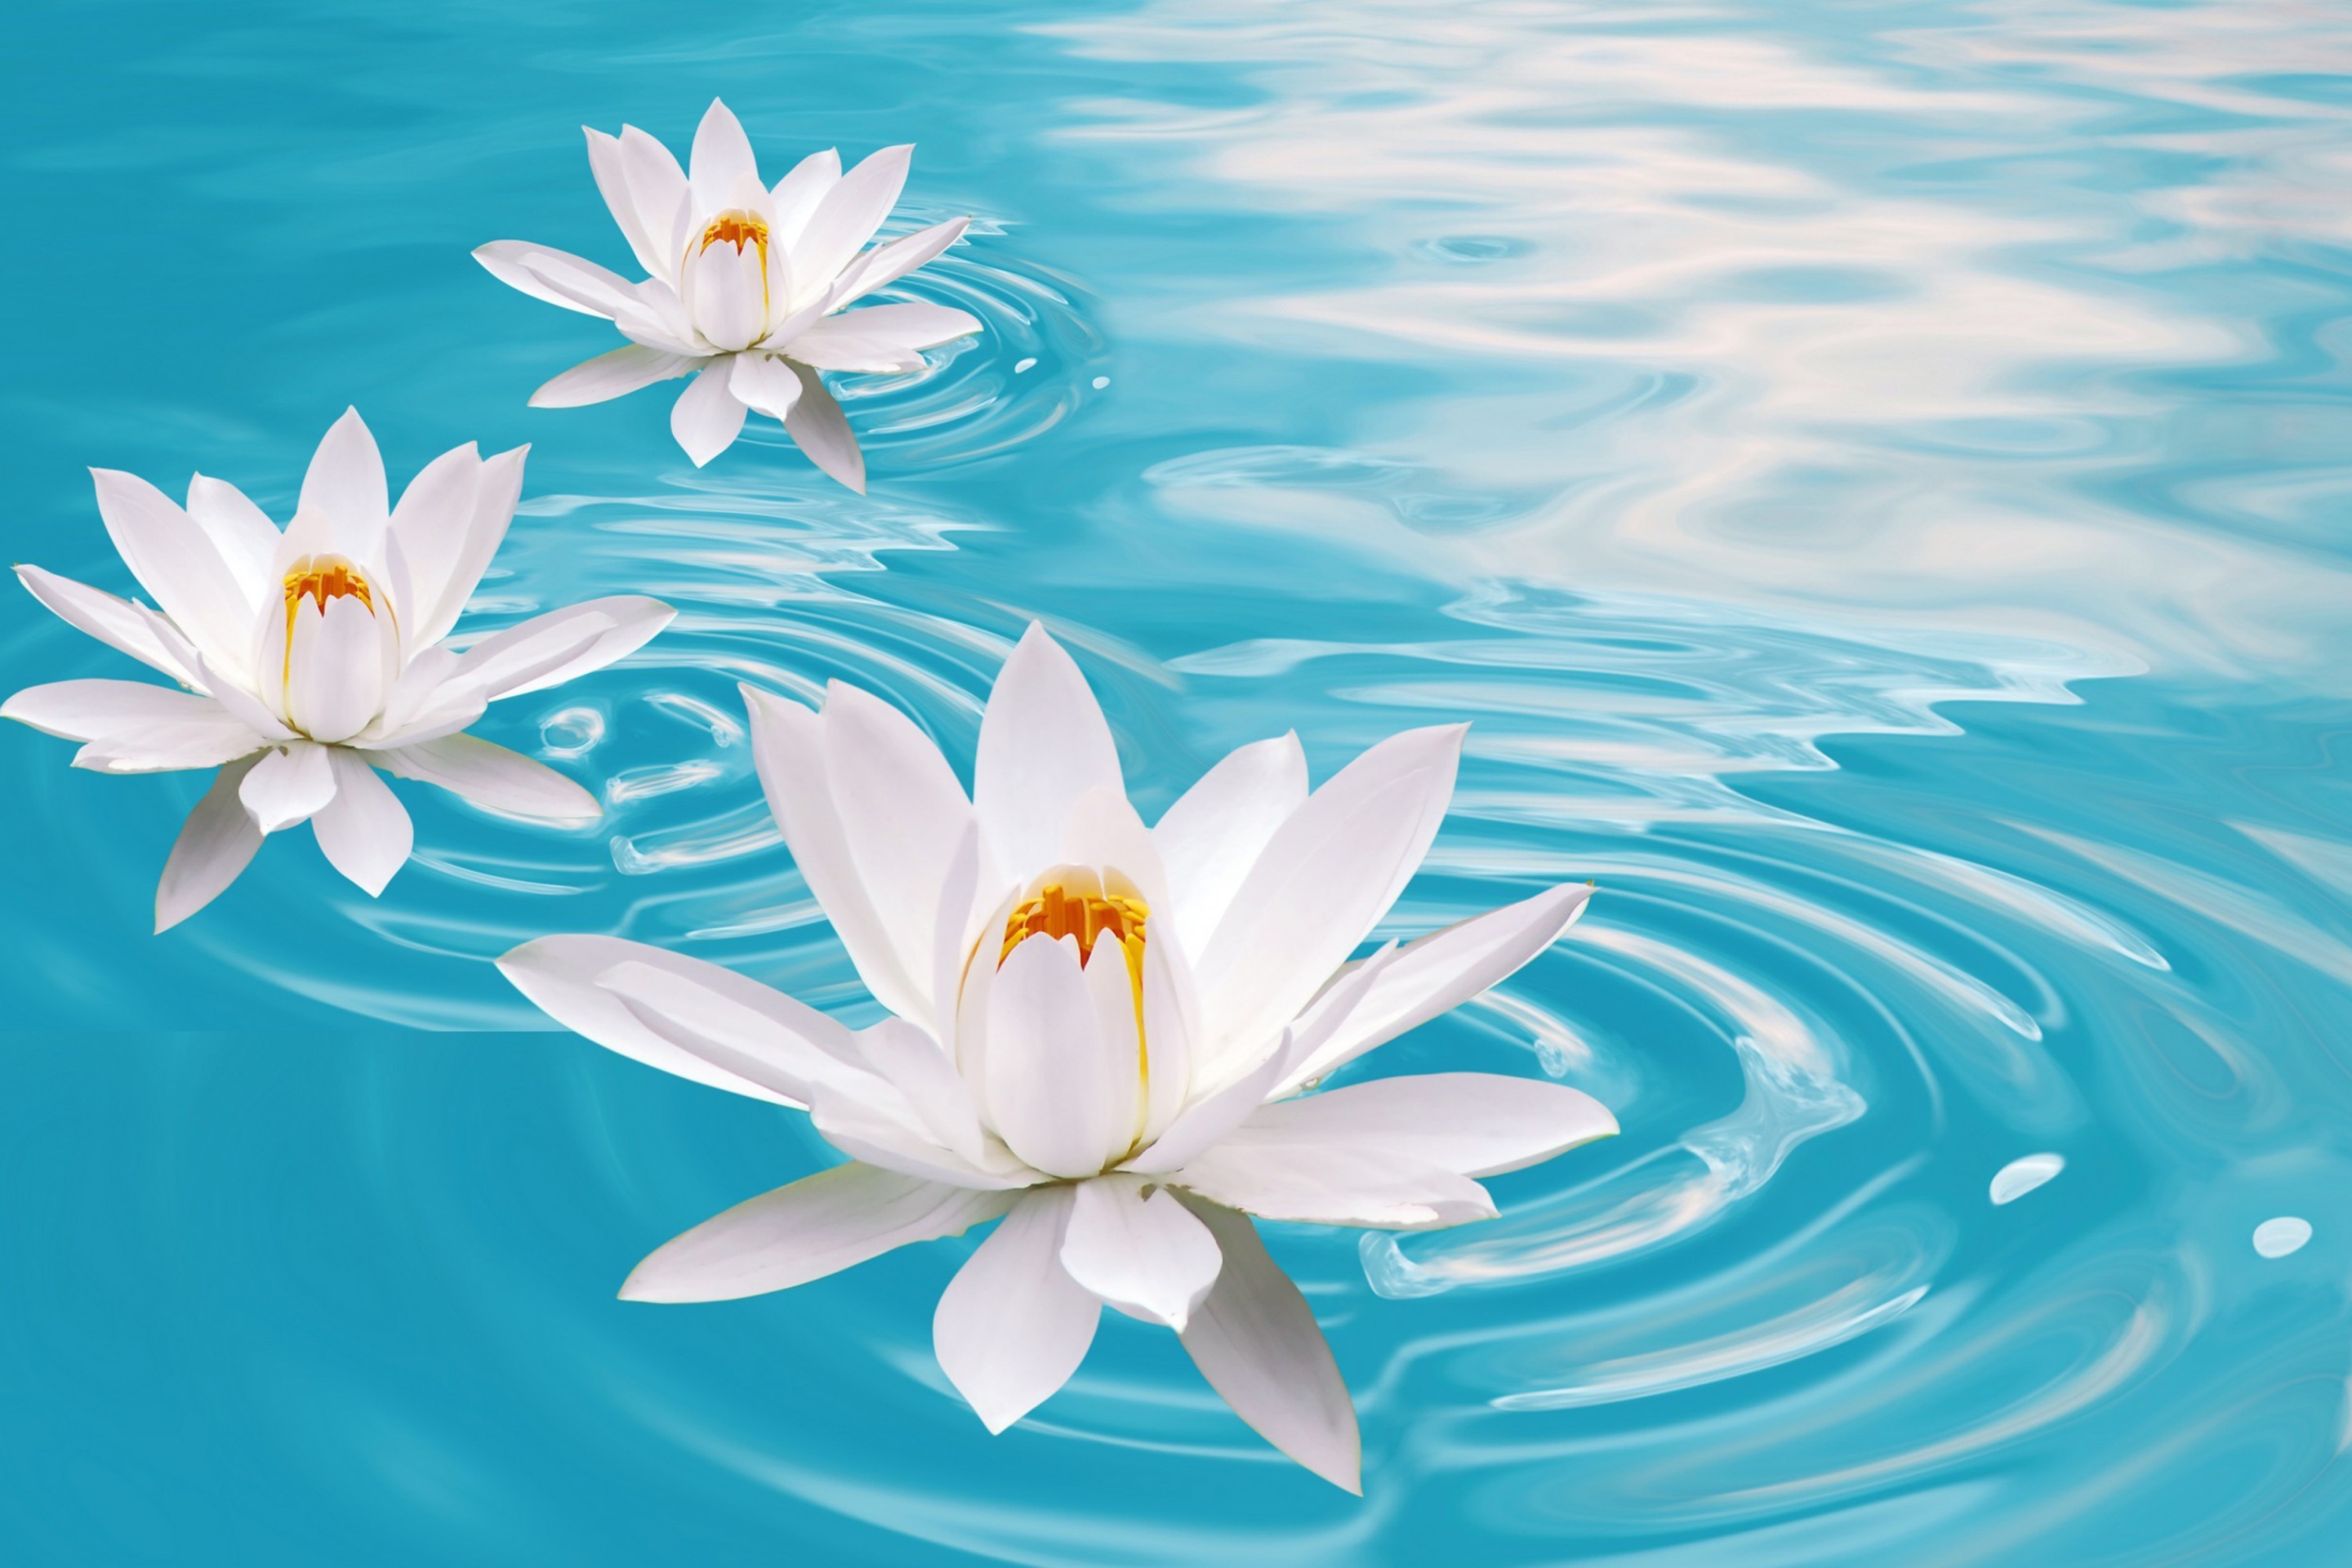 White Lilies And Blue Water wallpaper 2880x1920